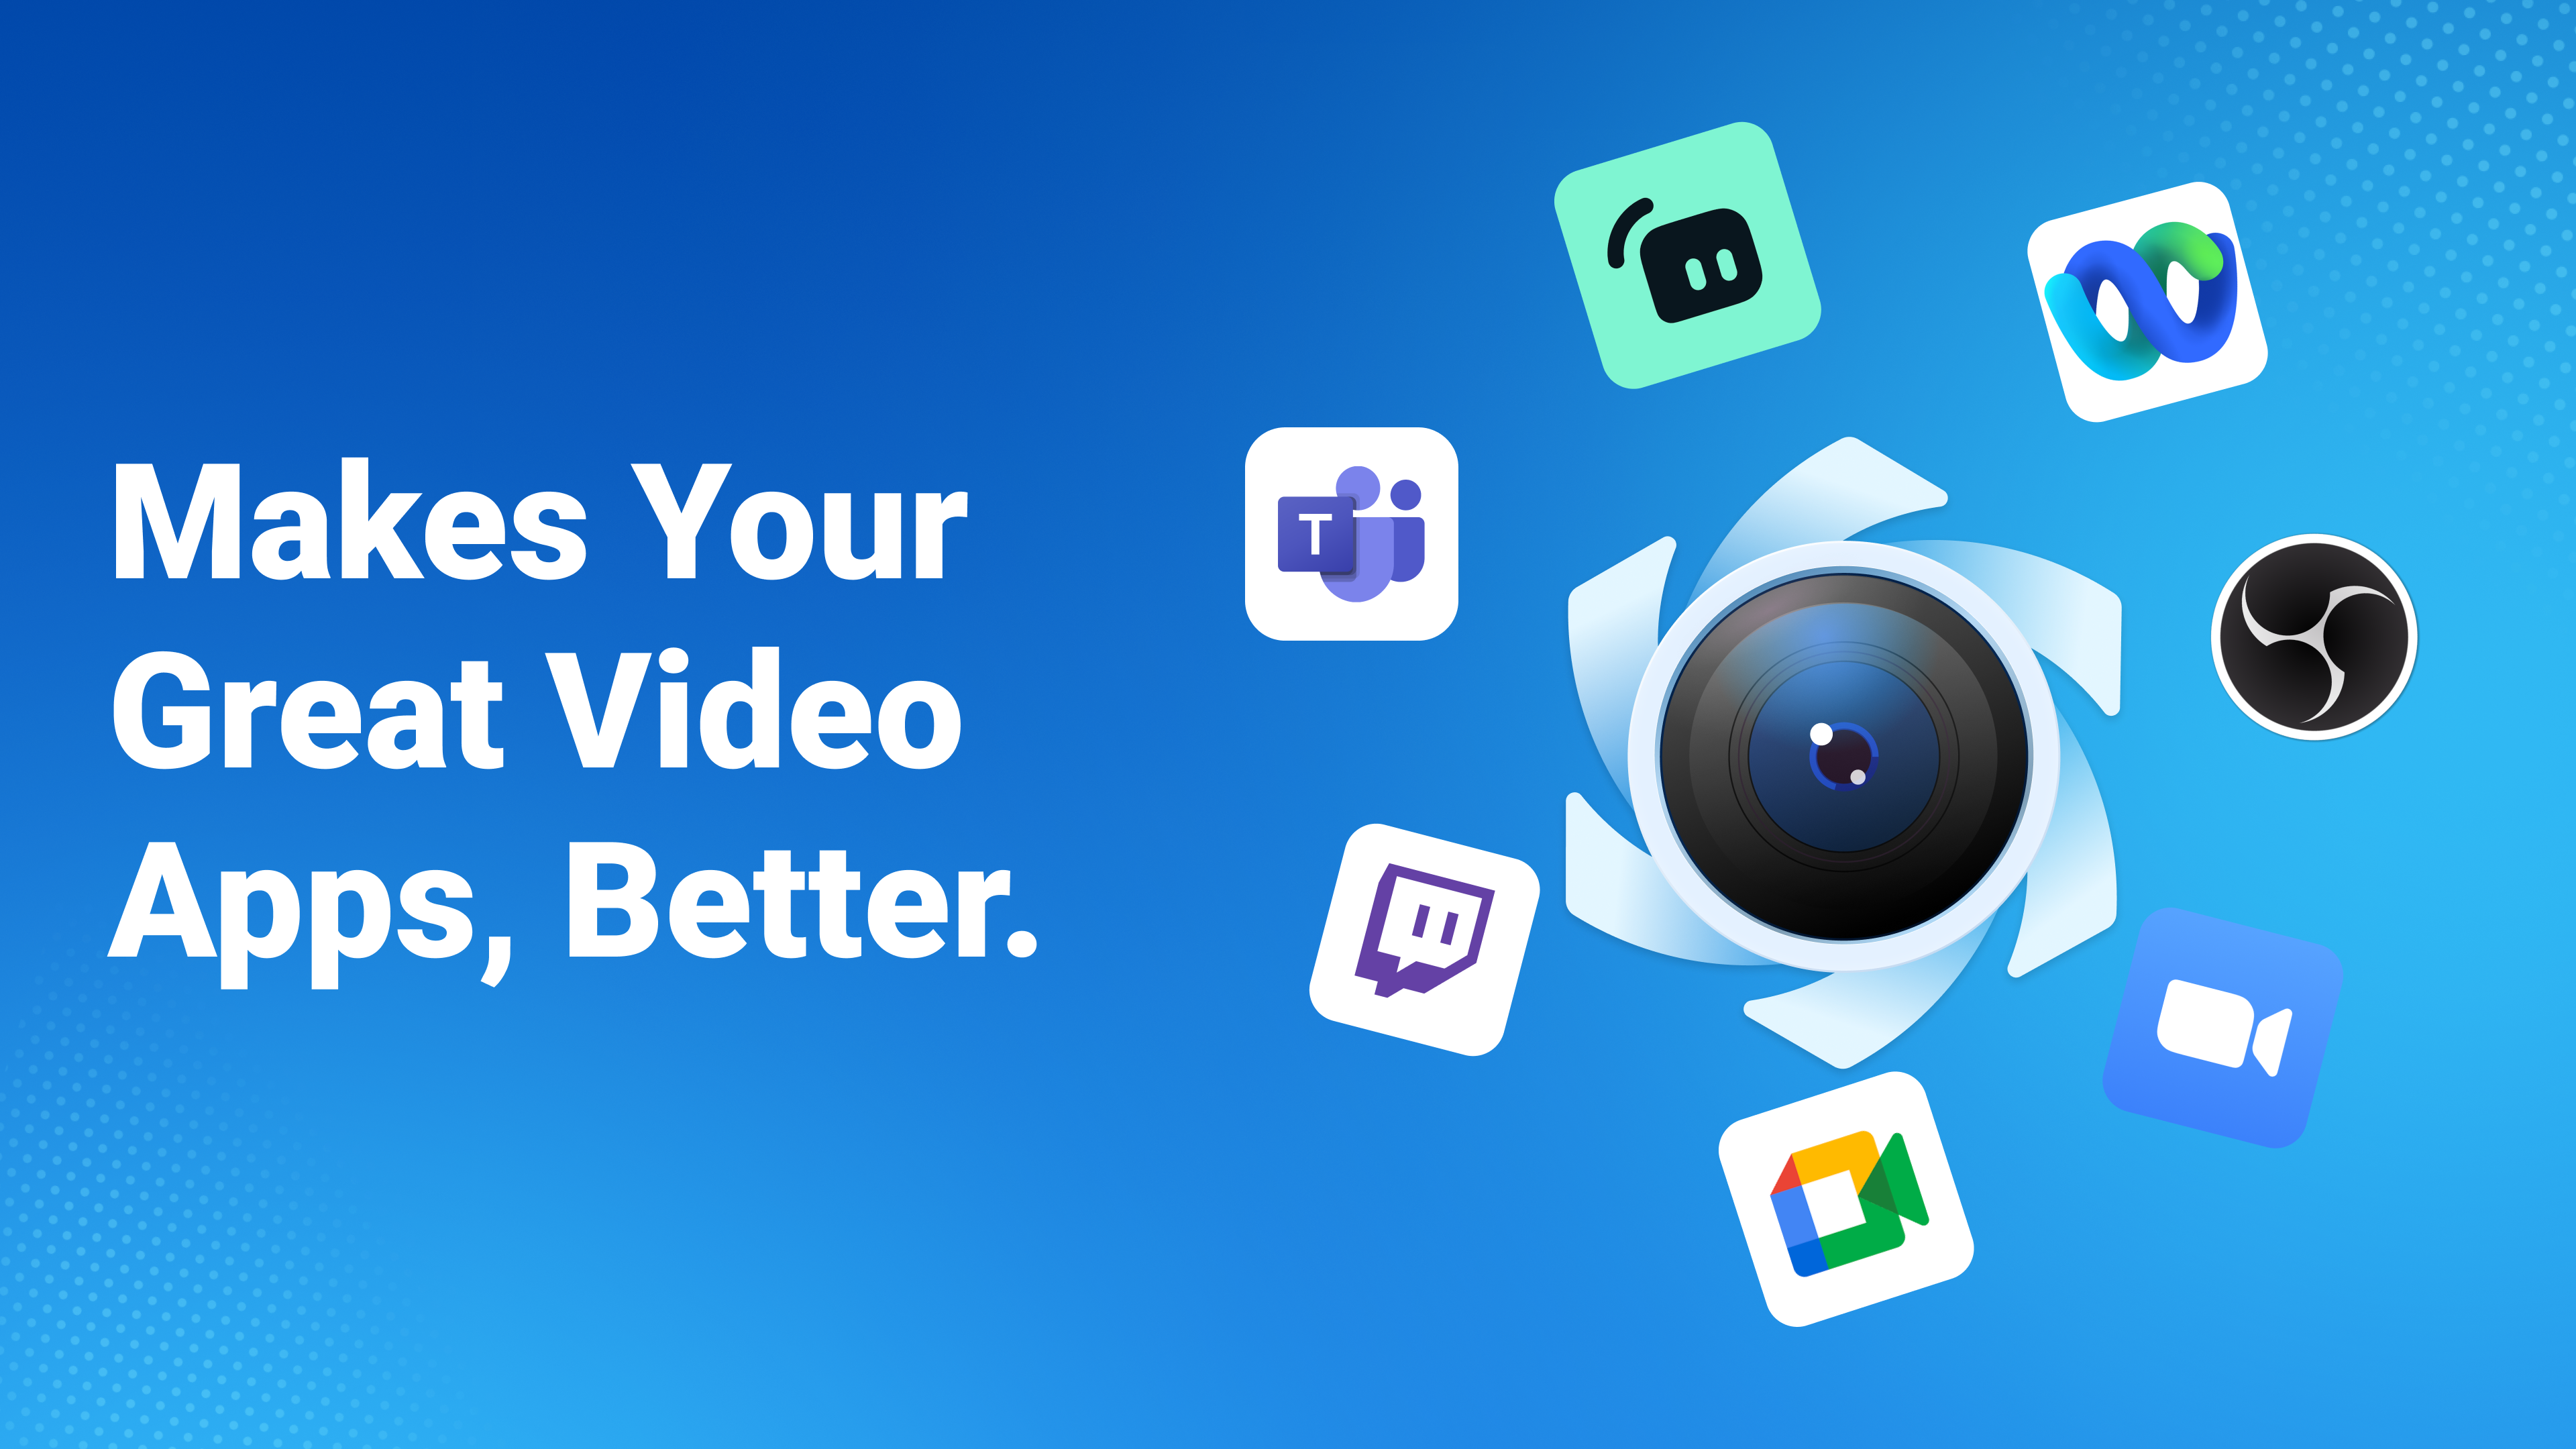 Makes Your Great Video Apps, Better.